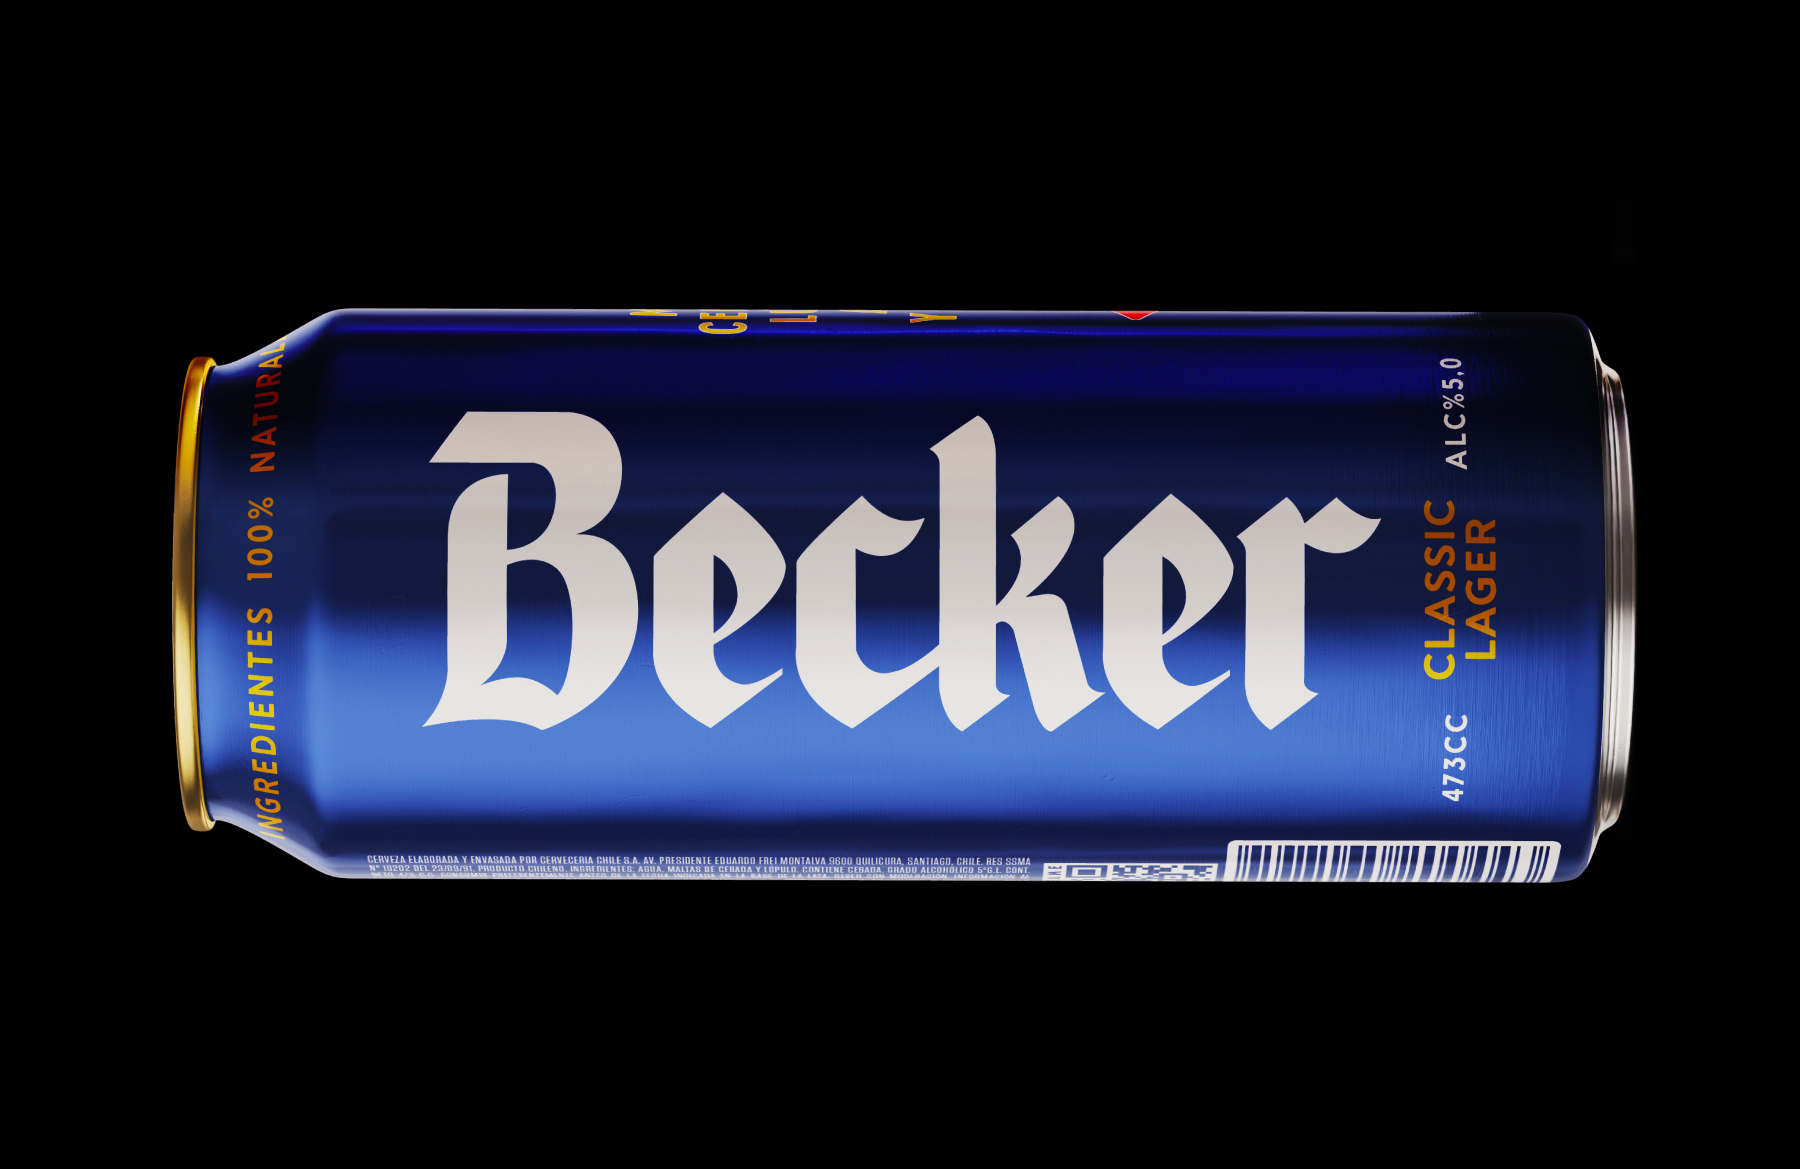 Becker Beers Get a Complete New Packaging Redesign